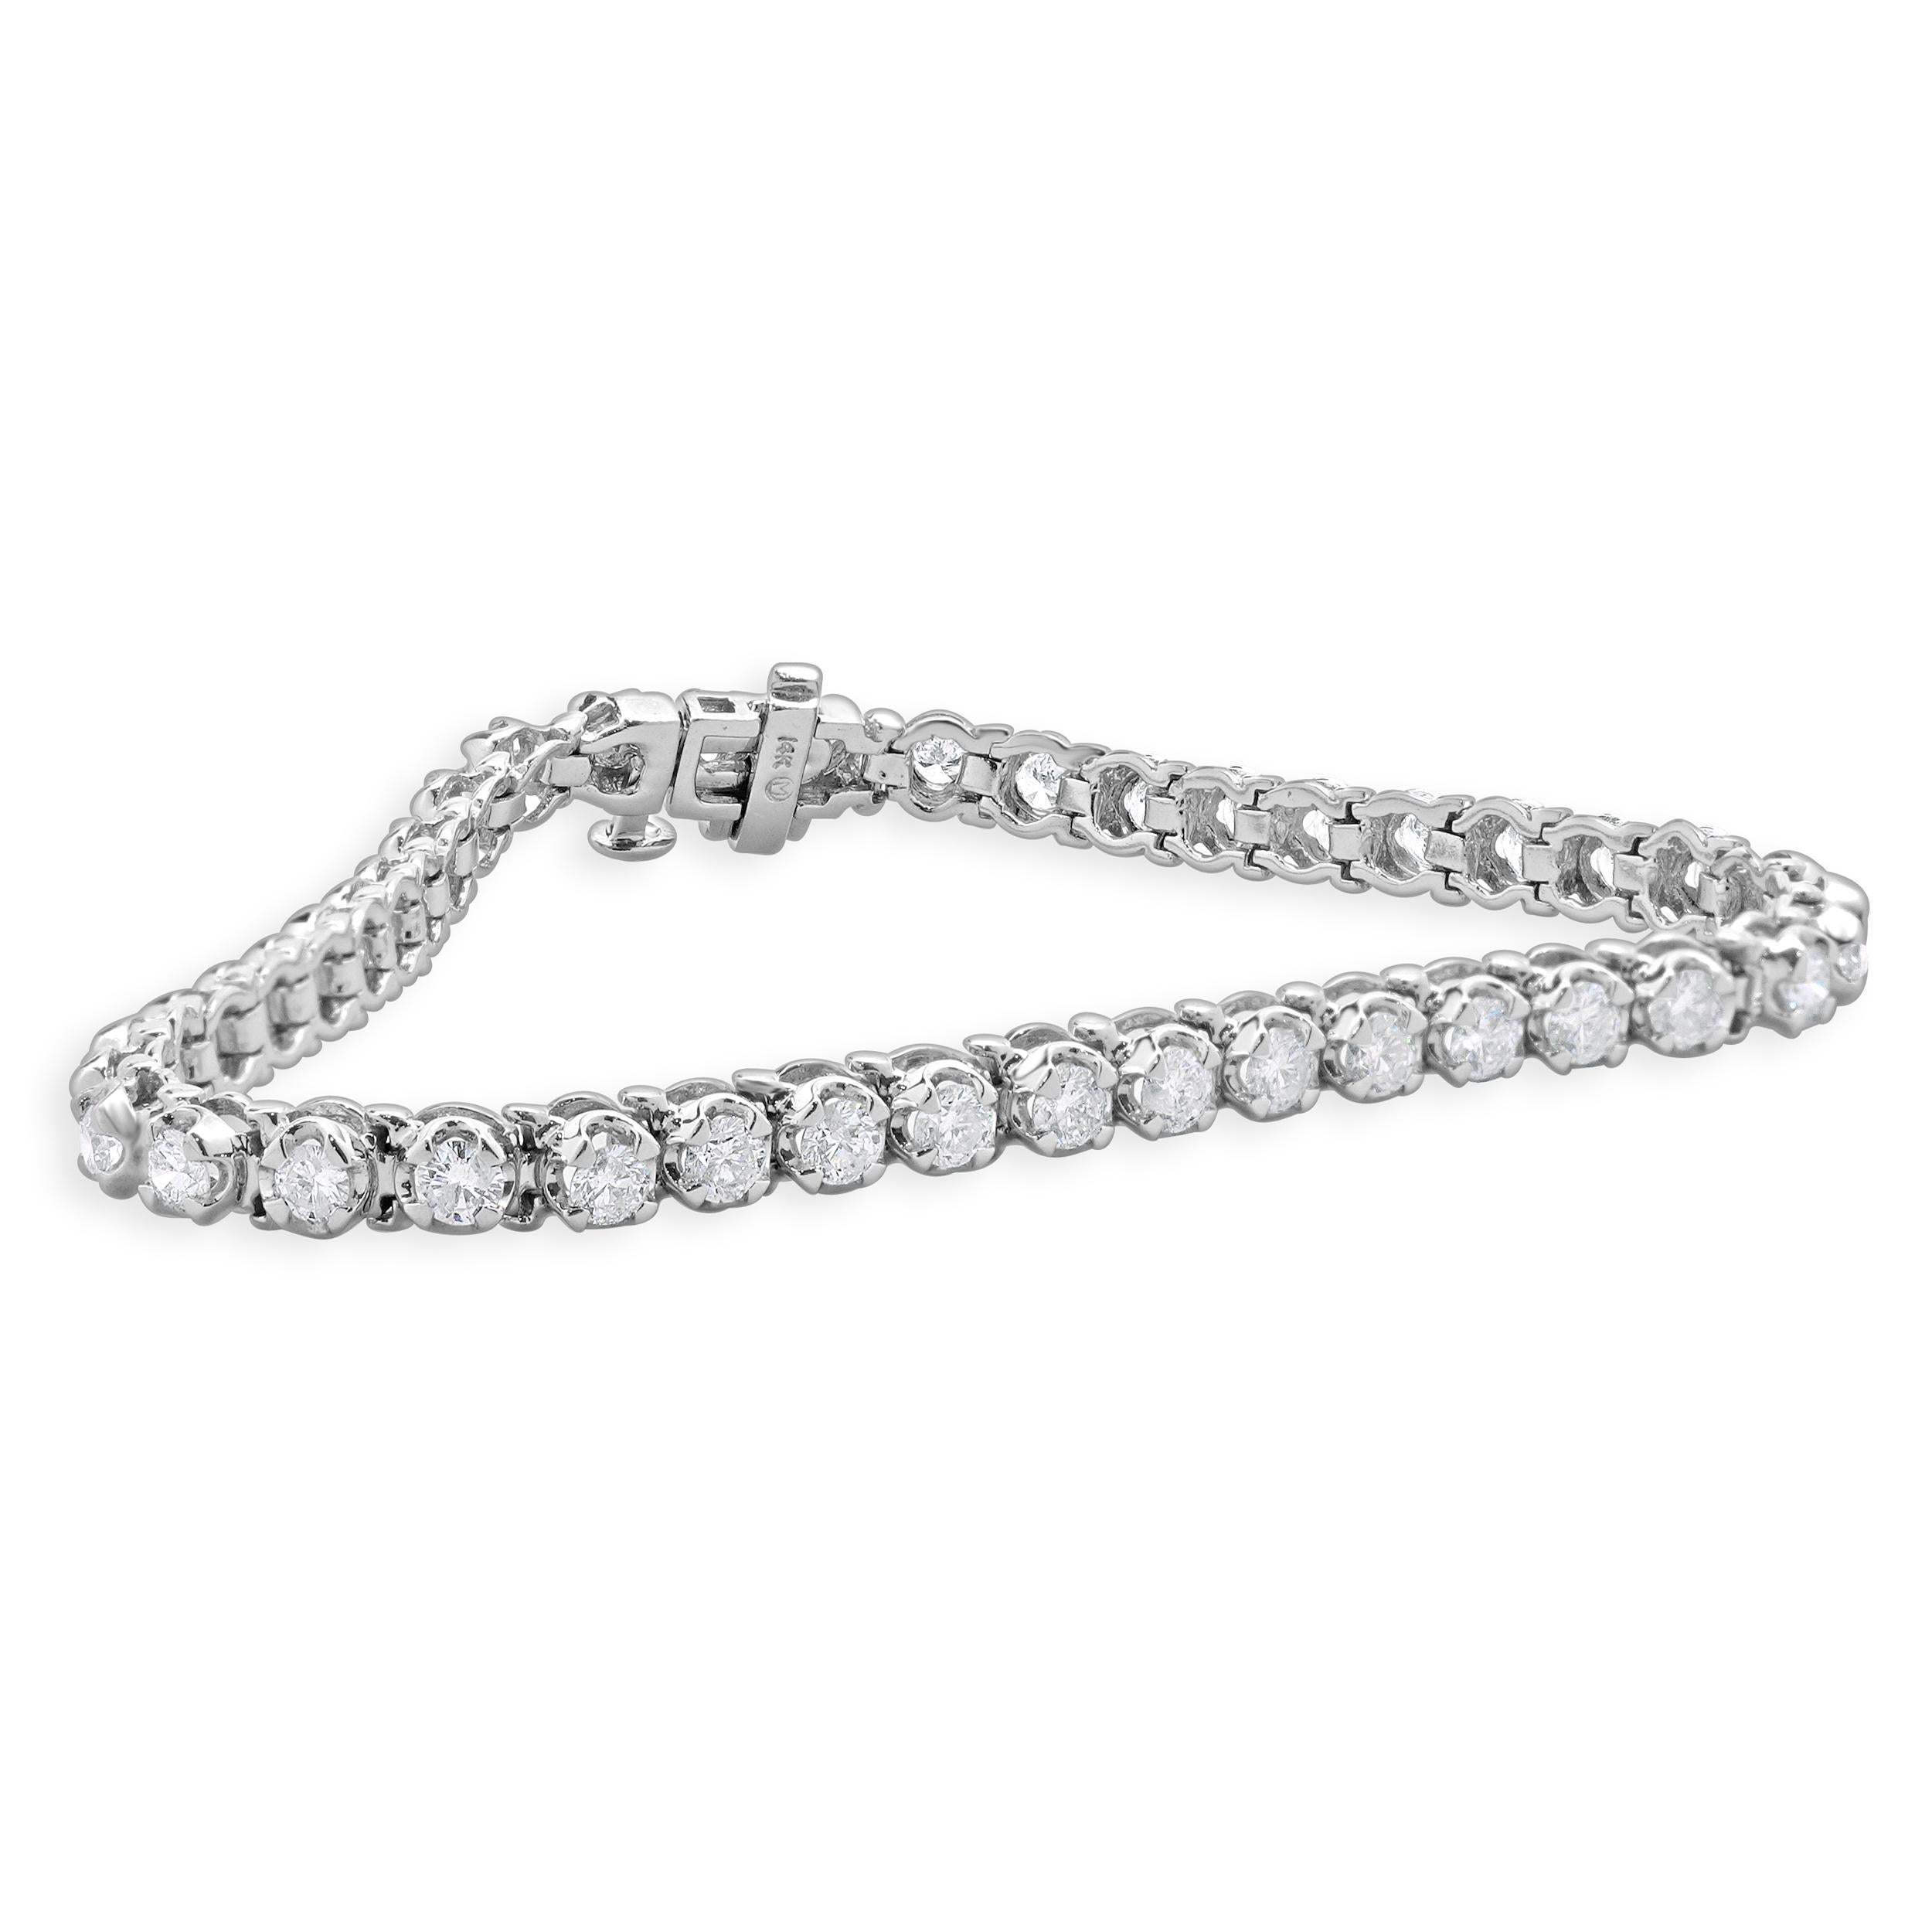 Designer: custom design
Material: 14K white gold
Diamond: 42 round brilliant cut = 2.95cttw
Color: J
Clarity: SI3
Dimensions: bracelet will fit up to a 6.5-inch wrist
Weight: 8.93 grams
